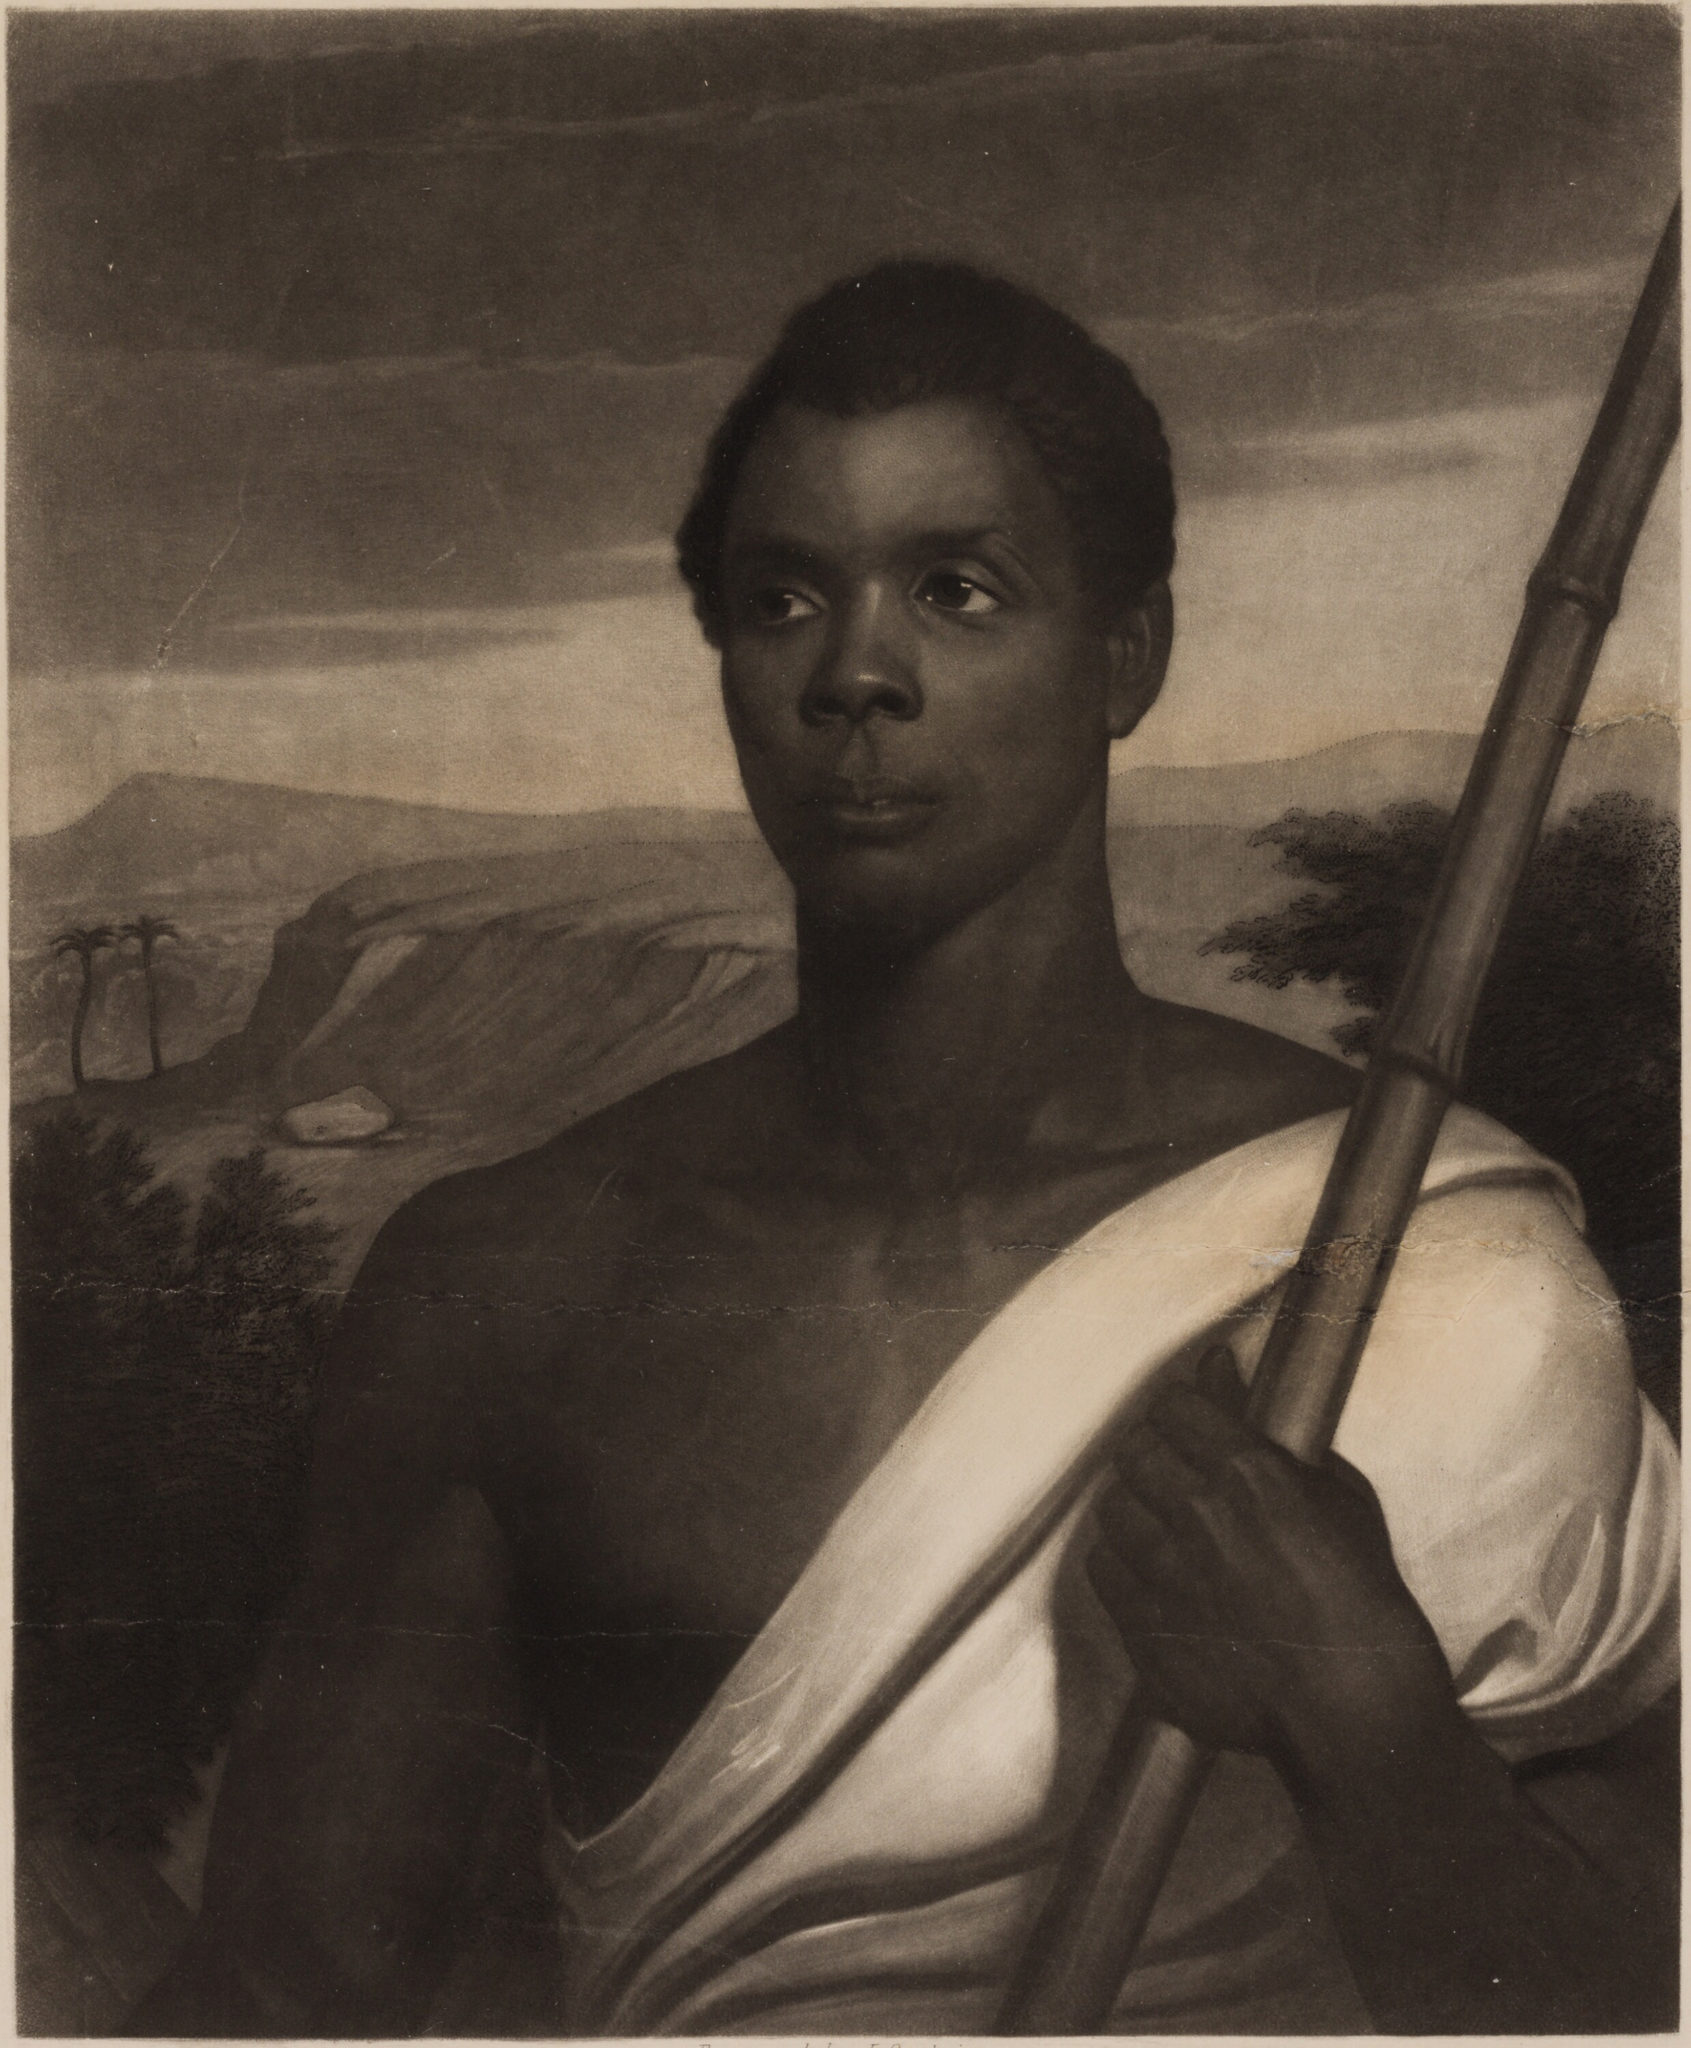 A sepia-toned portrait drawing of a Black man wearing a white cloak draped over one shoulder. He holds a staff and is posed in front of a landscape.